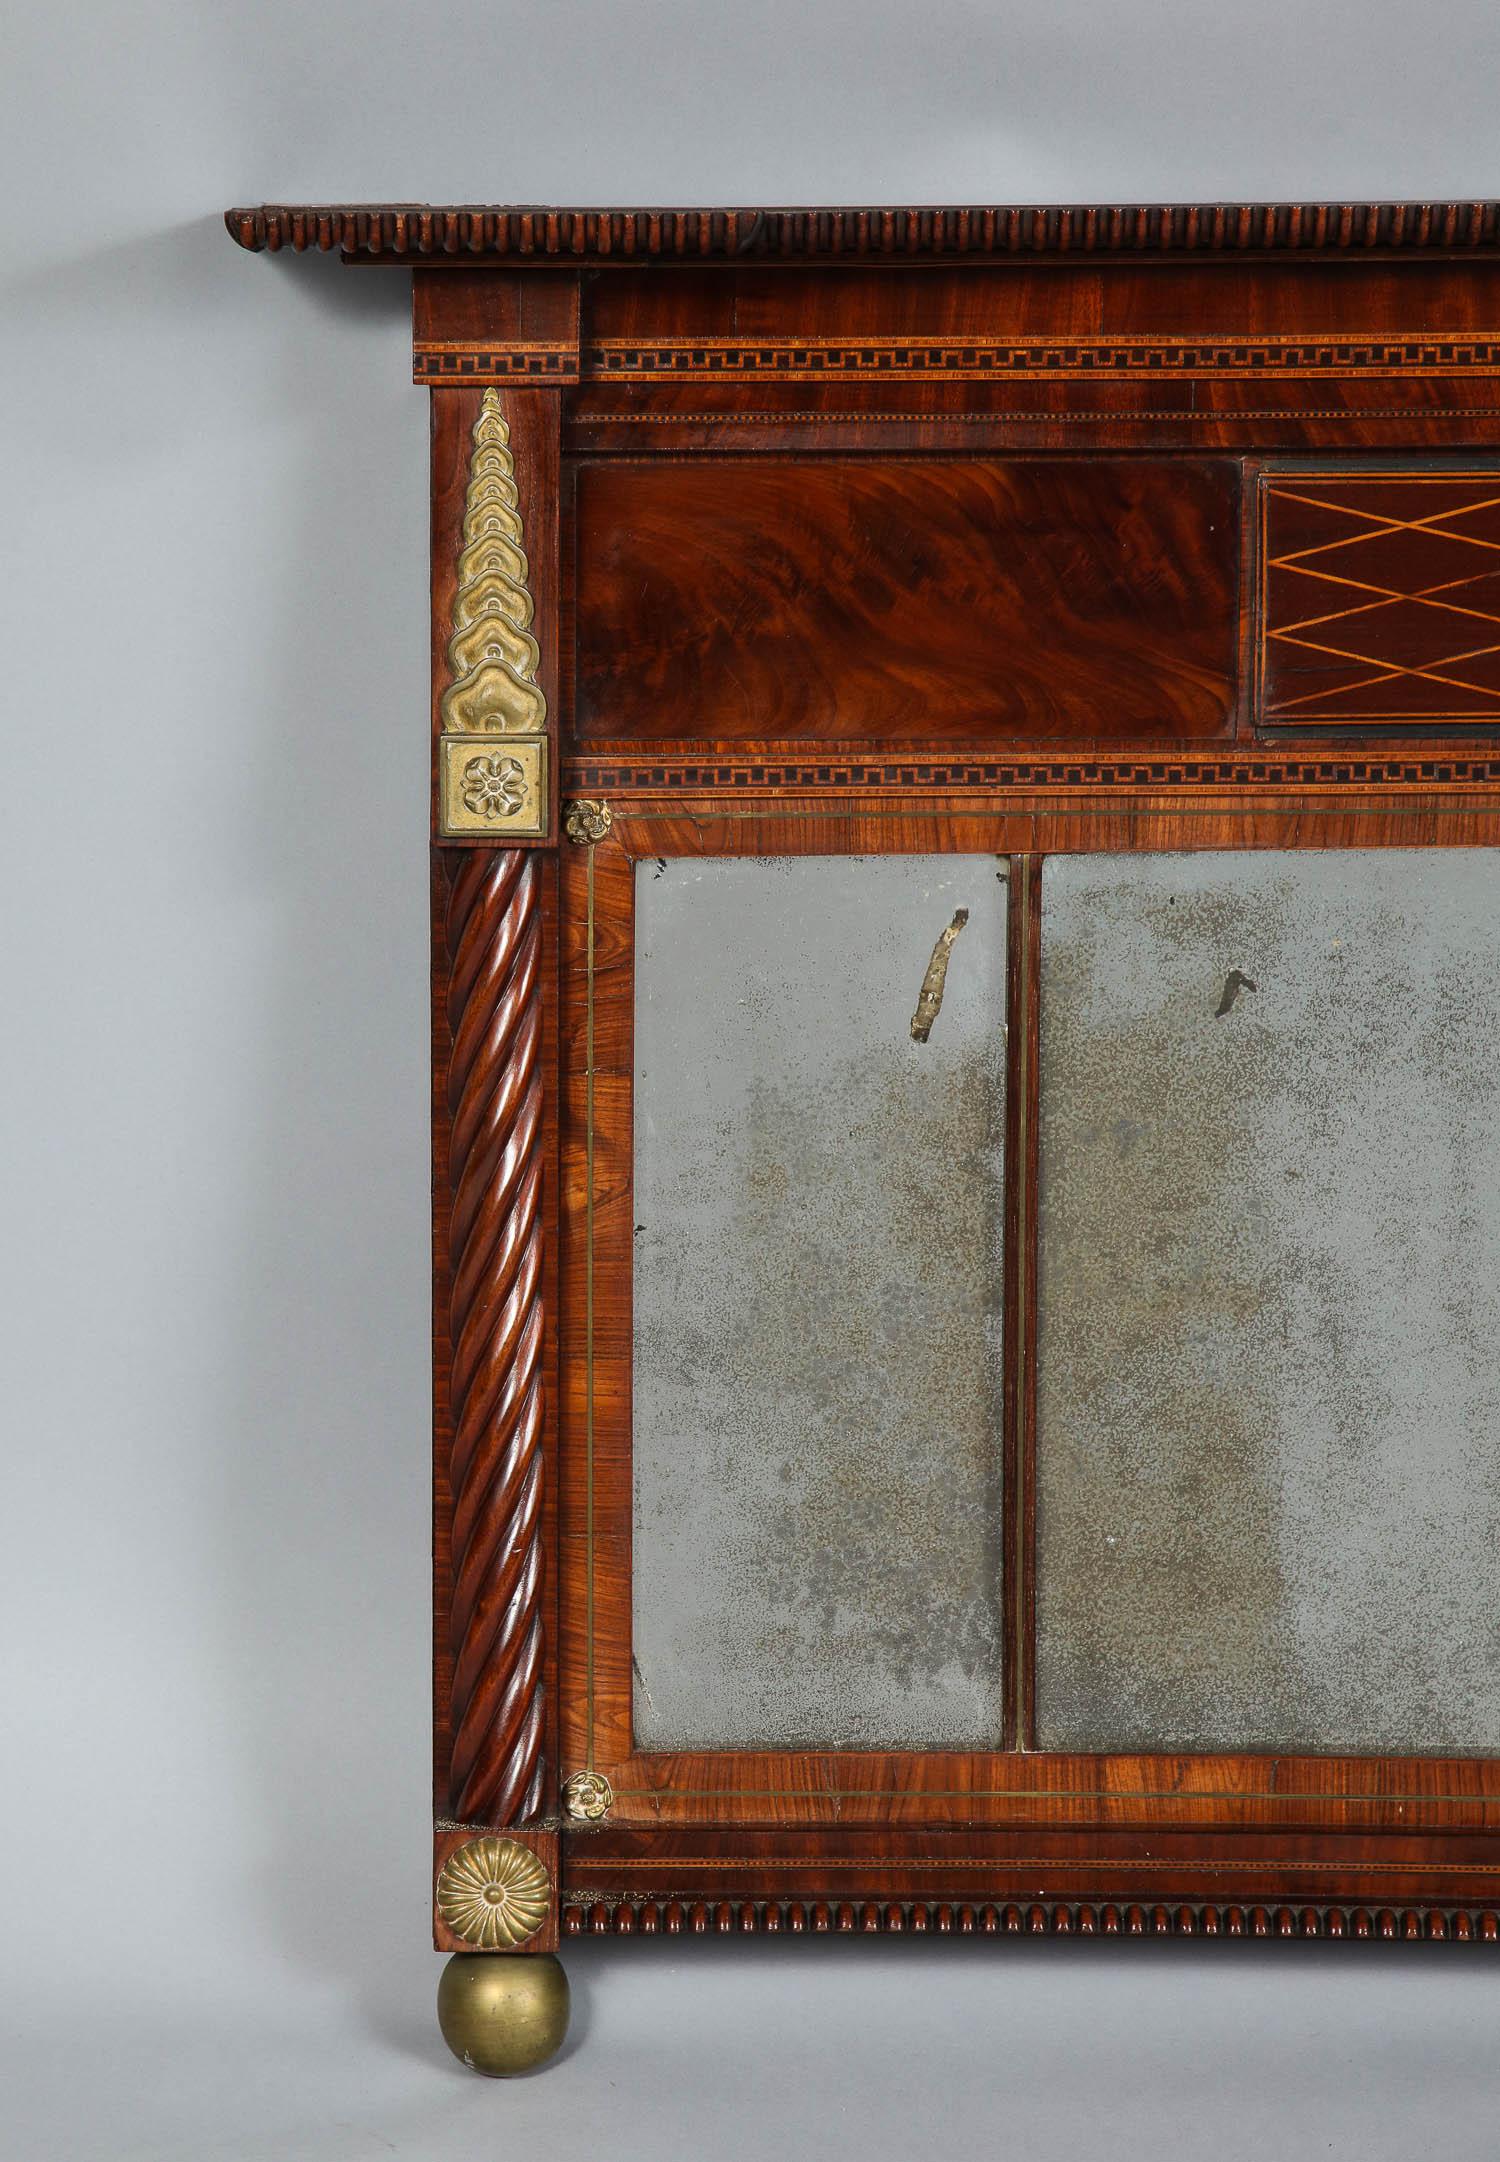 Rare and unusual Scottish Regency period three plate over mantel mirror, having original bronze mounts, highly figured veneer with fine inlay, original mercury glass plates, spiral fluted pilasters and good rich patina throughout. Retaining original